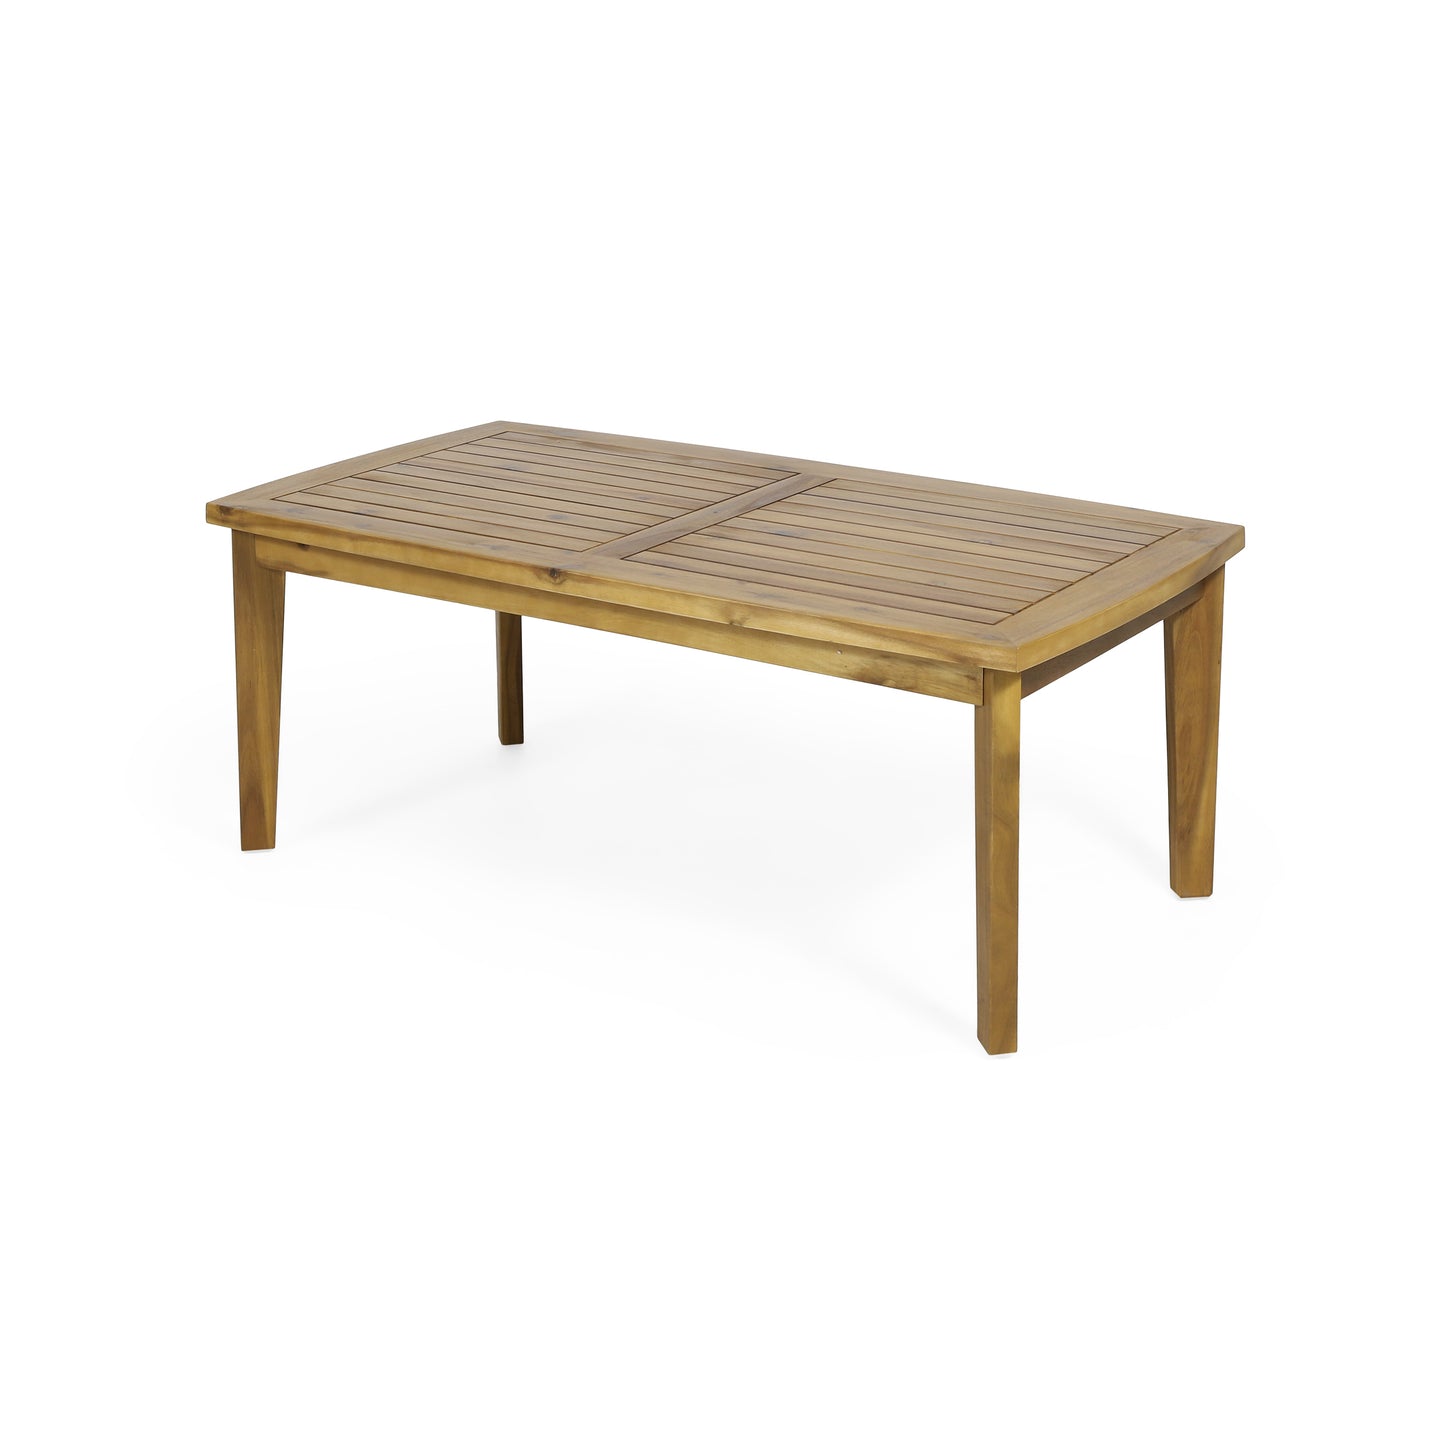 Laiah Outdoor Wooden Chat Set with Rectangular Coffee Table